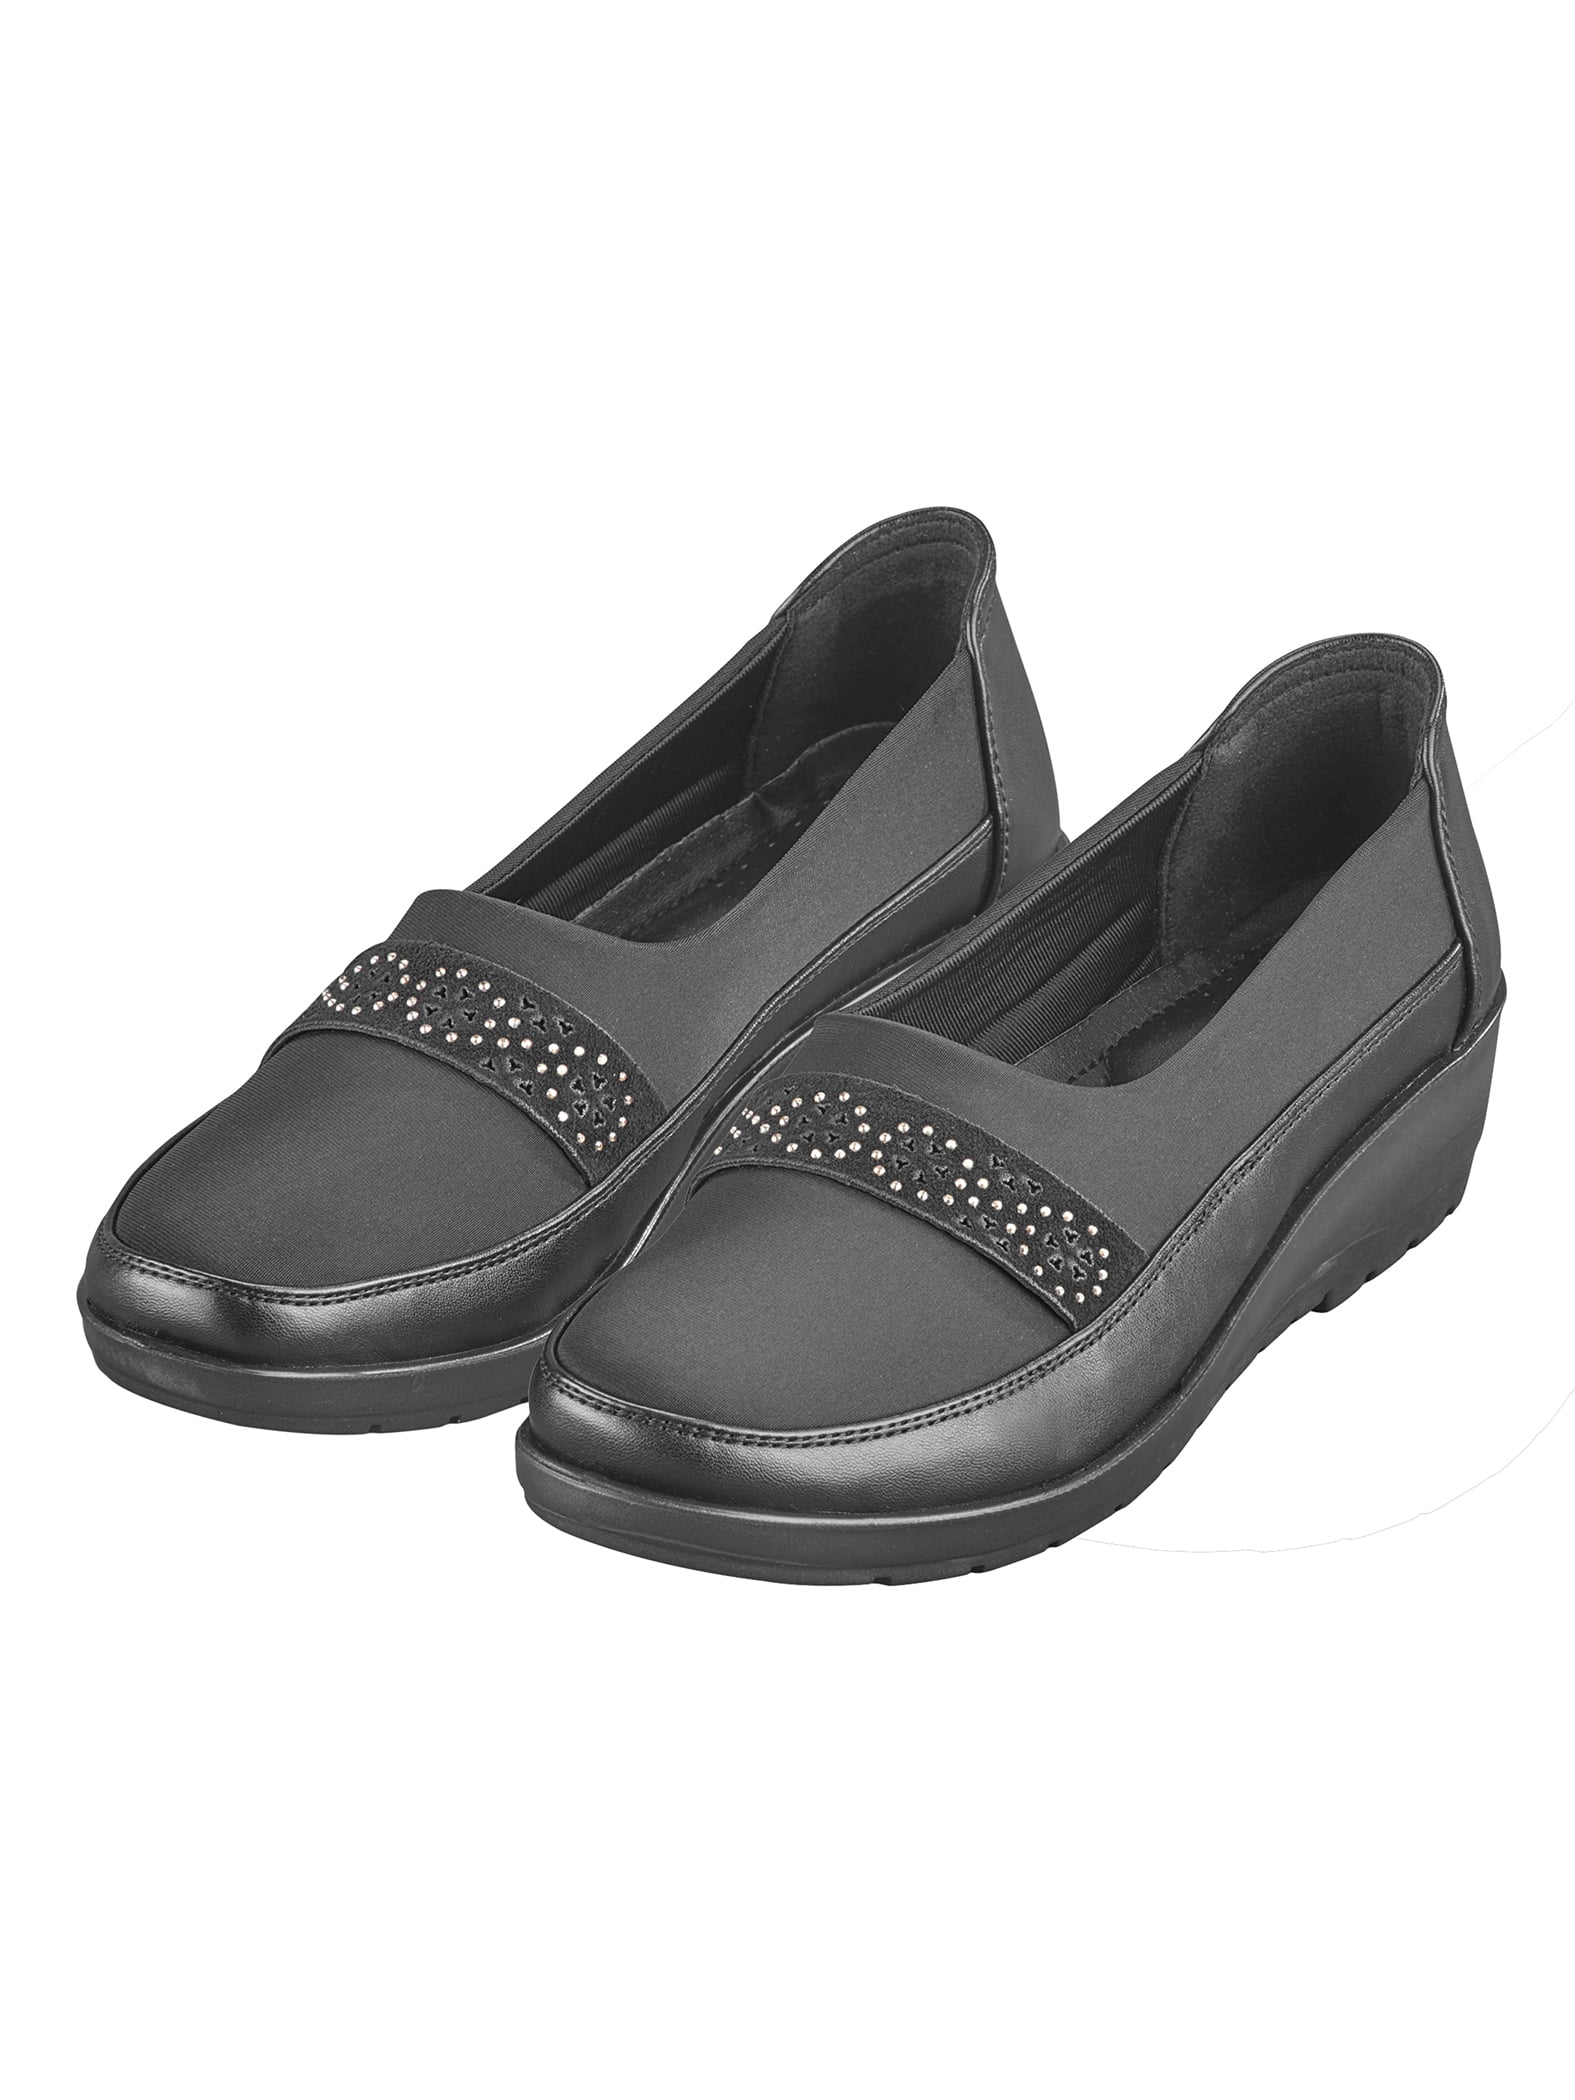 Collections Etc Rhinestone Decorated Stretch Inset Shoes - Walmart.com